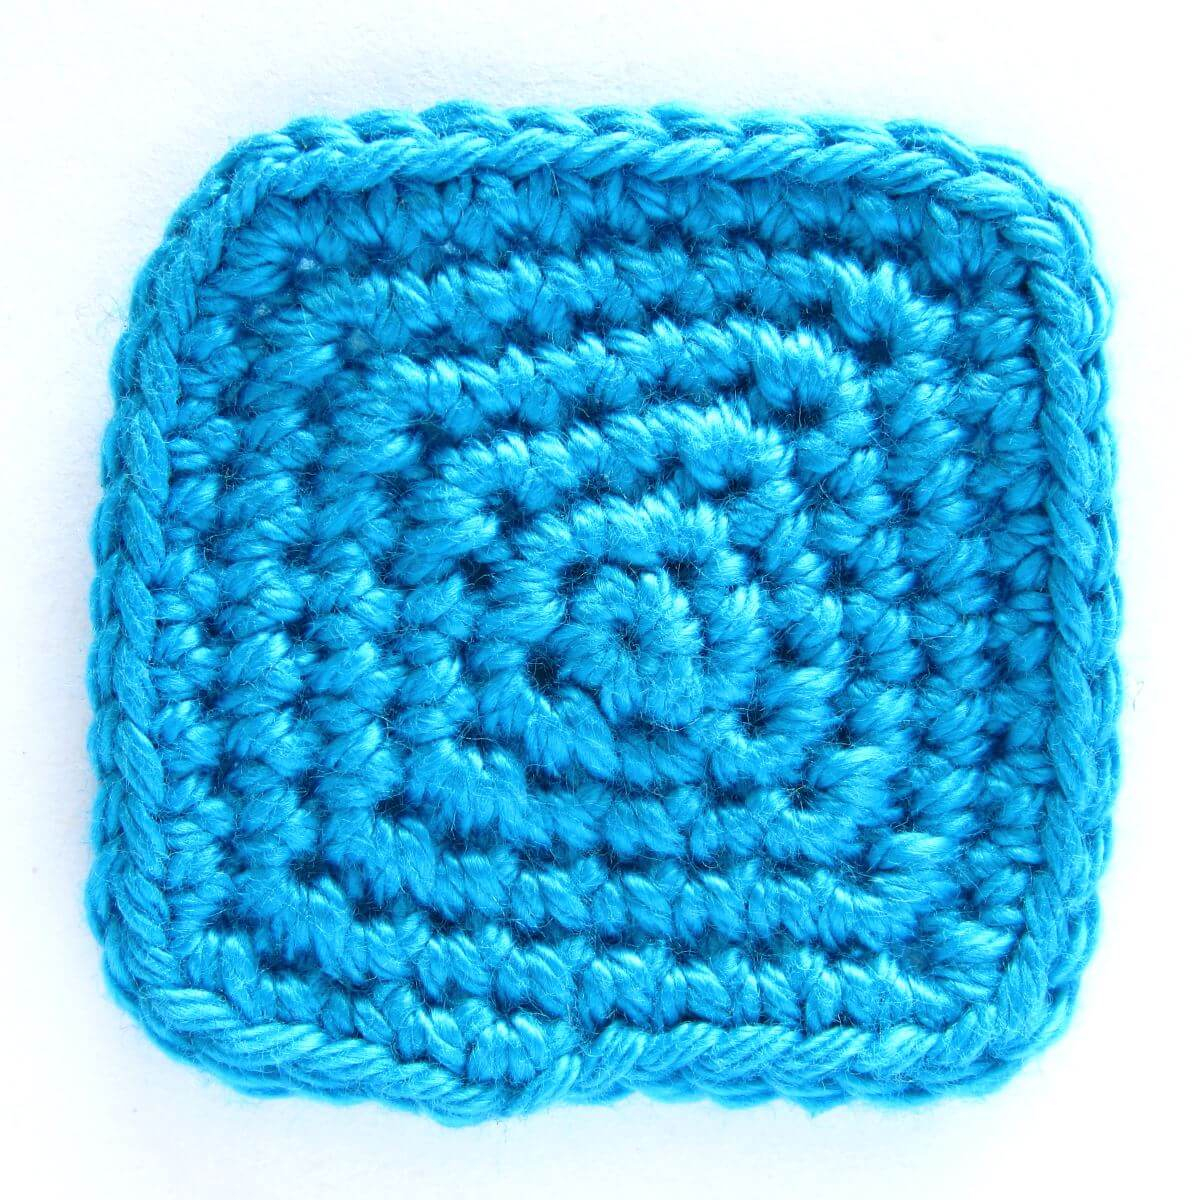 Crochet Squares Patterns How To Crochet Squares In Spiral Rounds Supergurumi